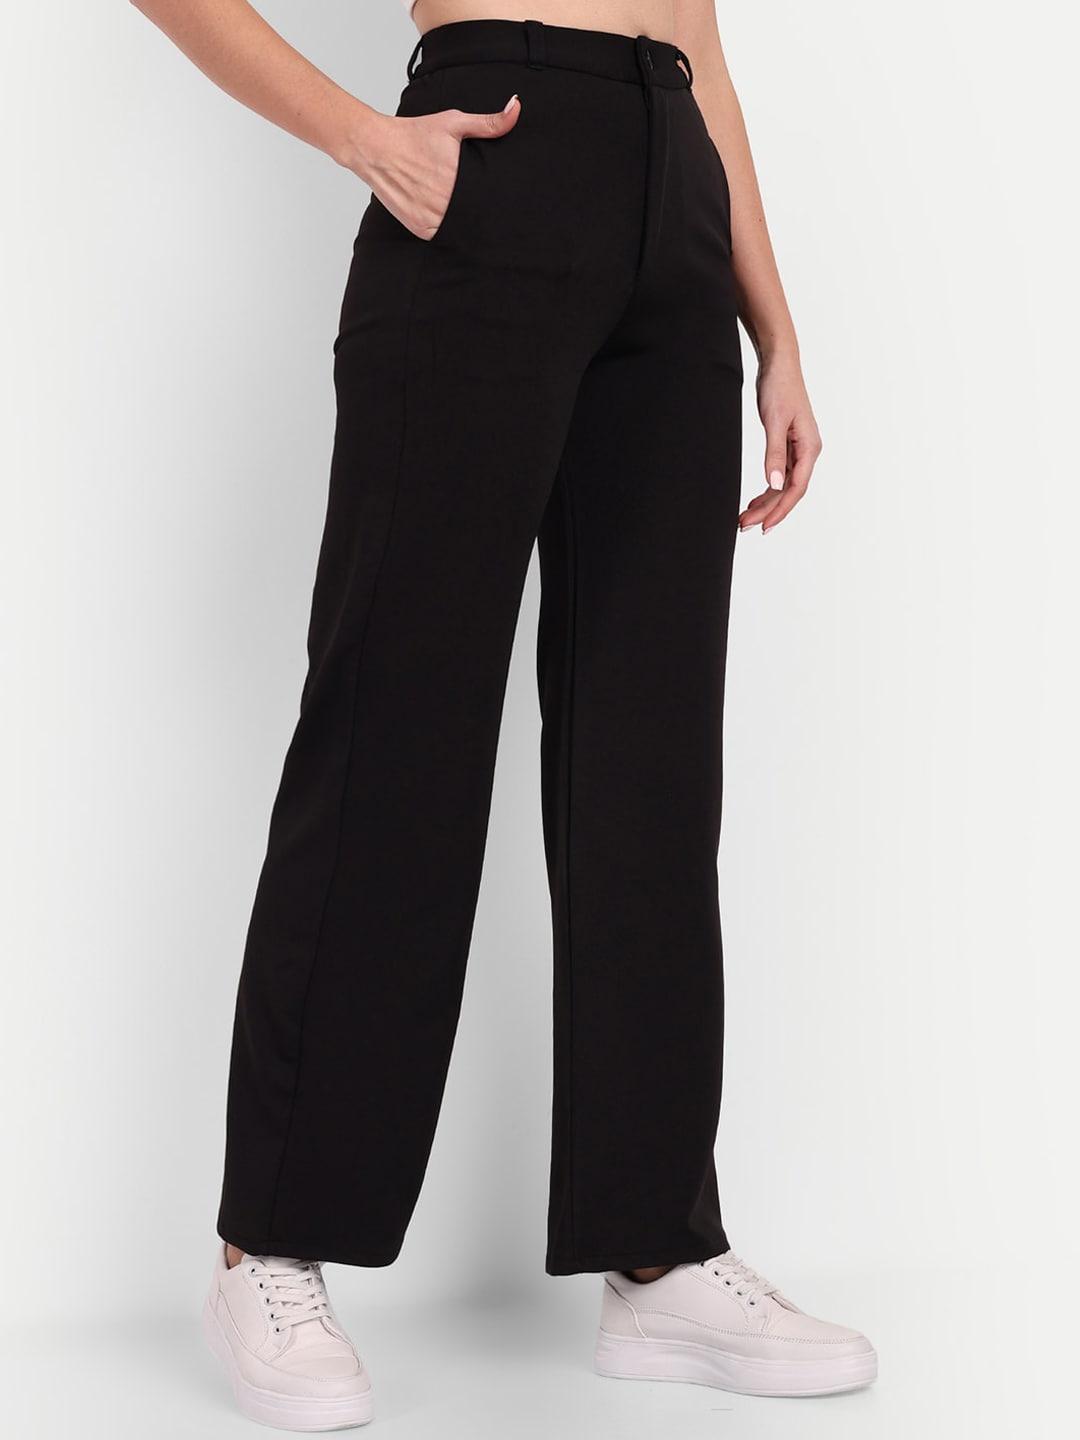 broadstar-women-straight-fit-high-rise-easy-wash-parallel-trousers